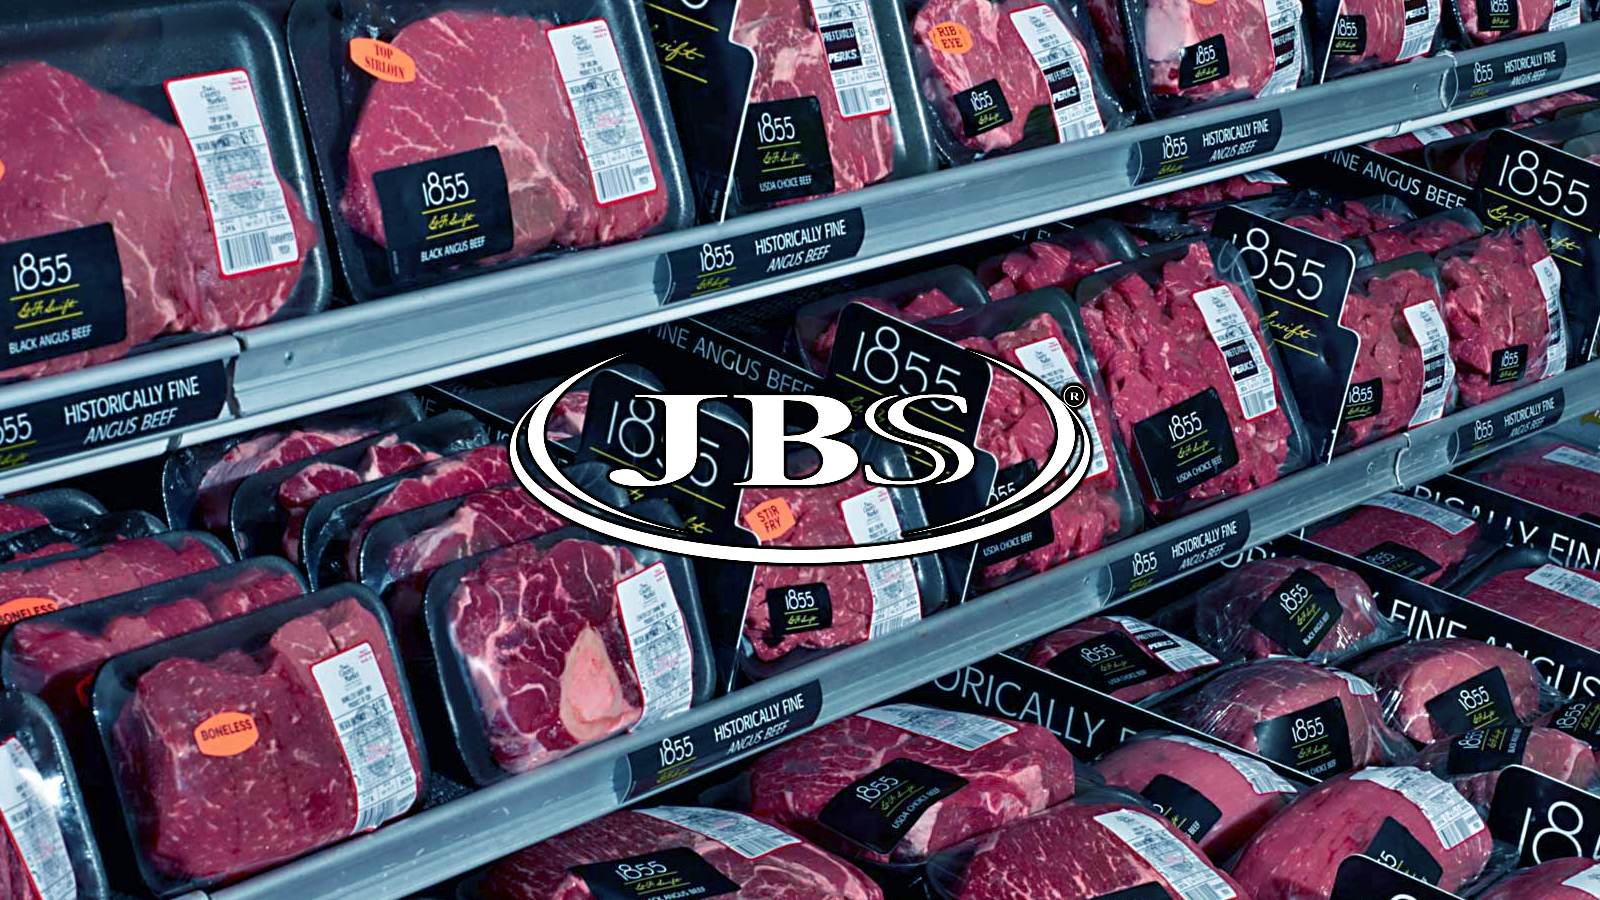 Meat giant JBS now fully operational after ransomware attack